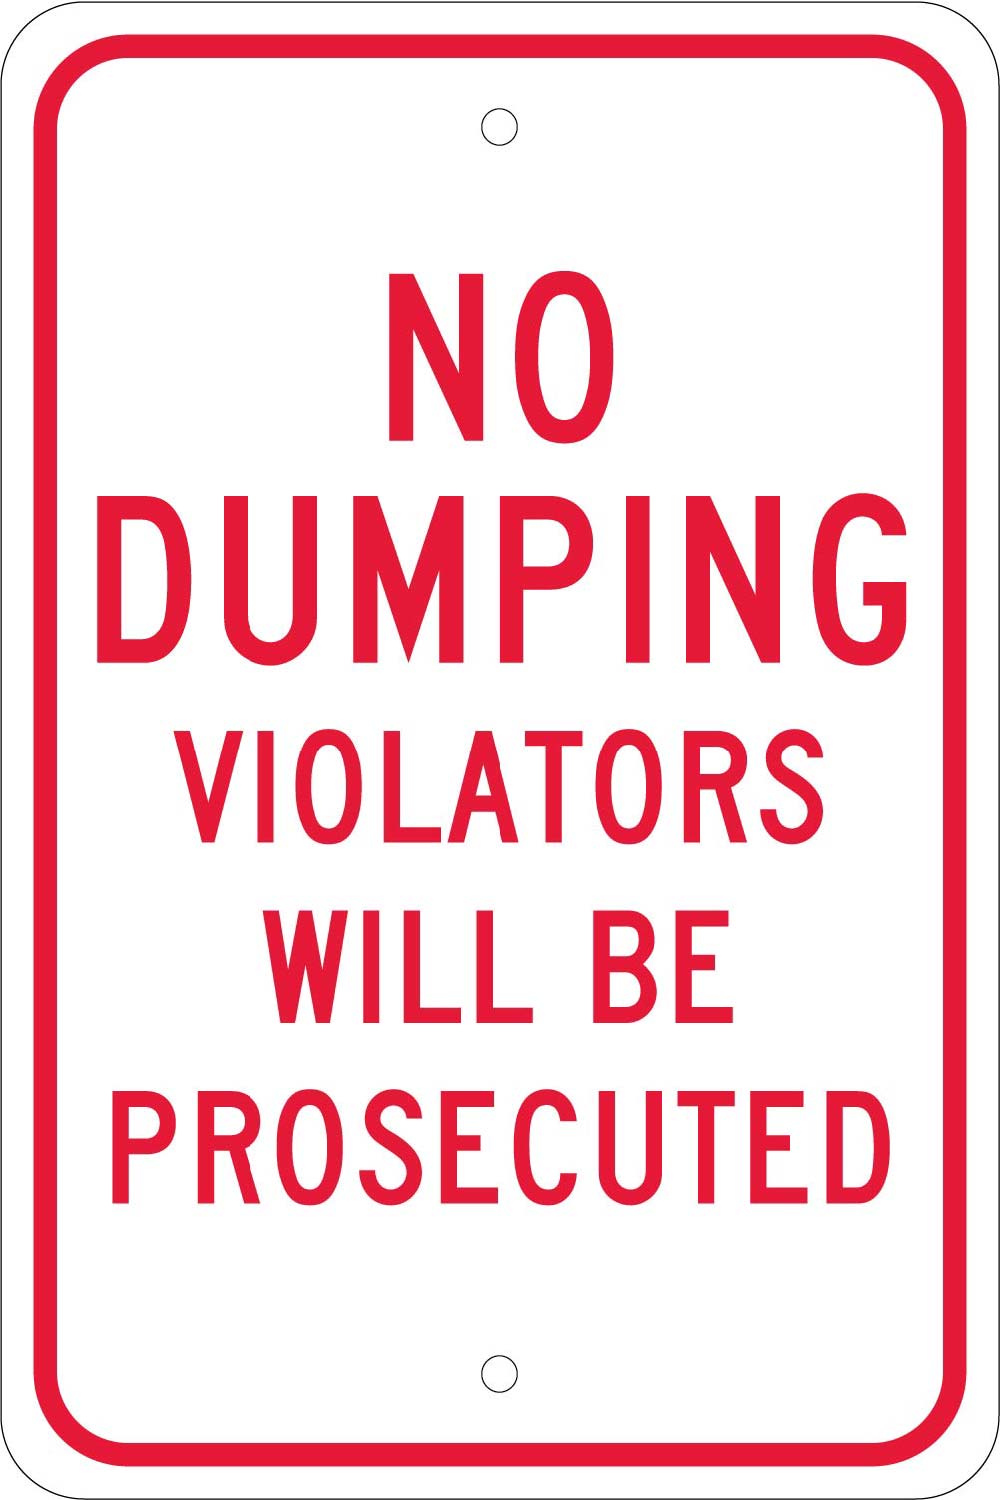 No Dumping Violators Will Be Prosecuted Sign-eSafety Supplies, Inc